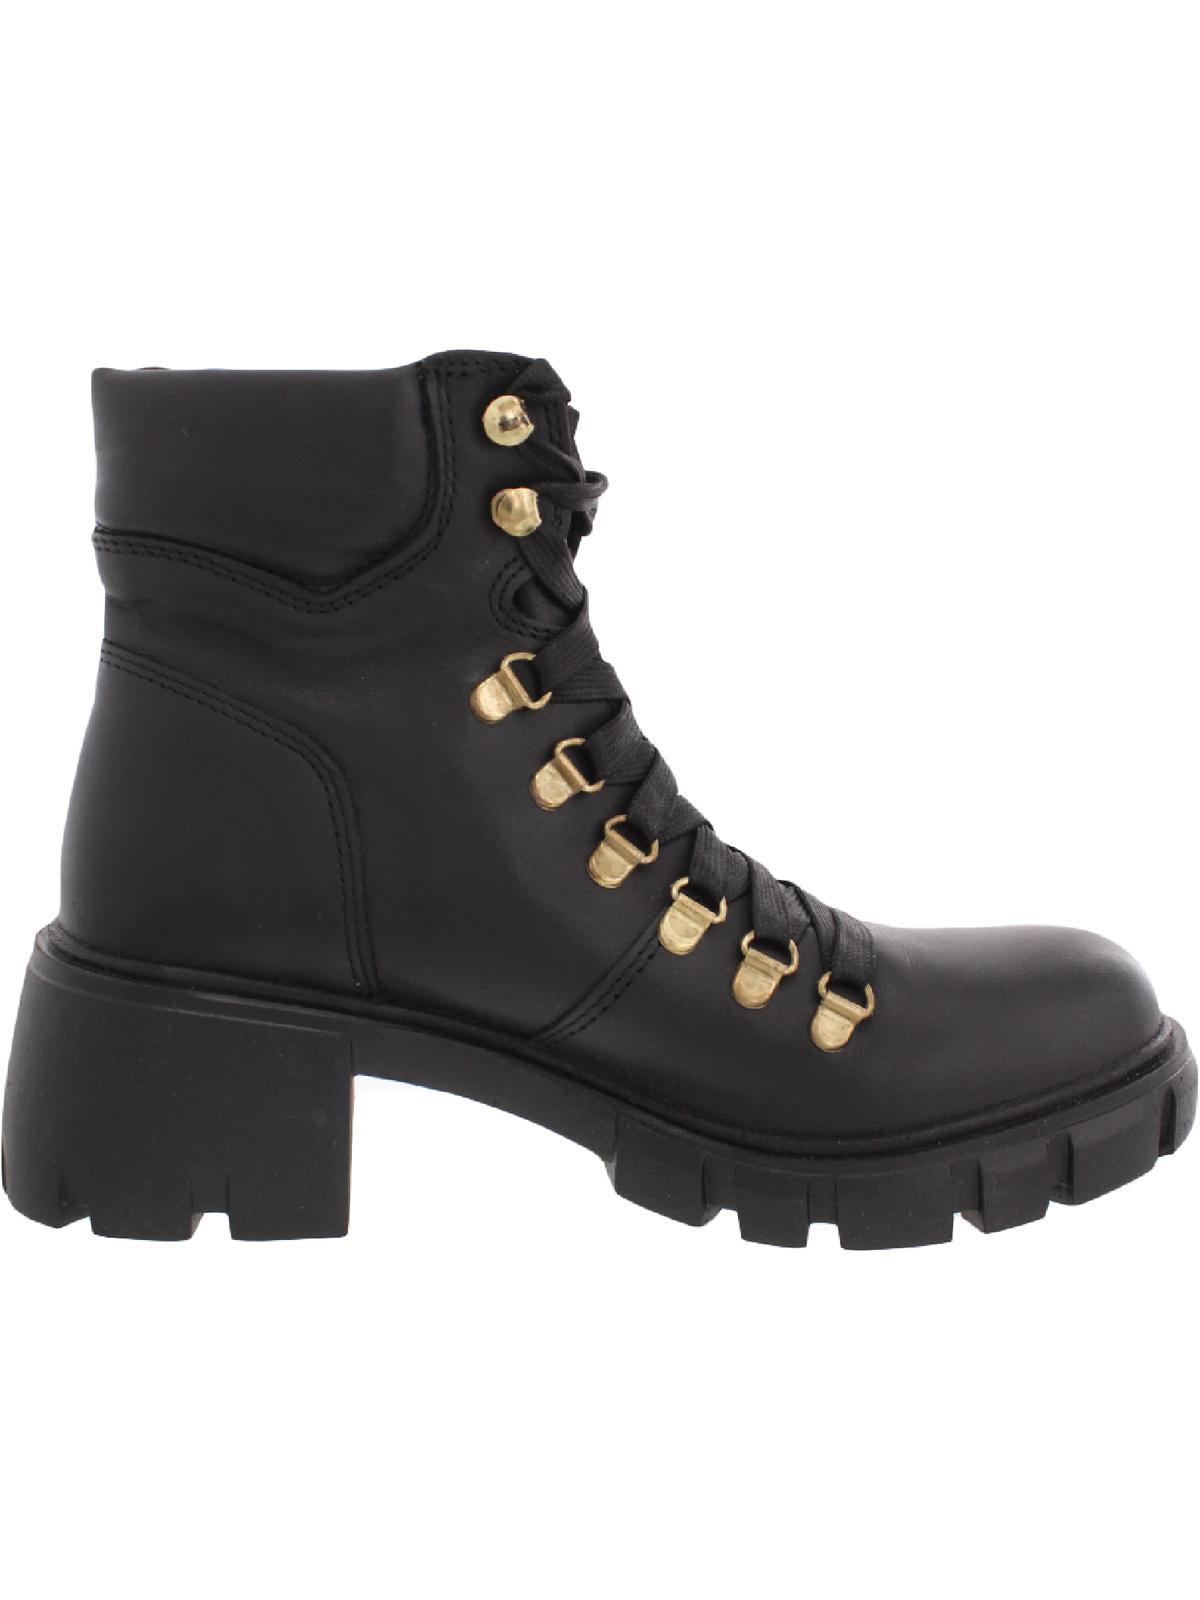 Steve Madden Hint Leather Ankle Combat & Lace-up Boots in Black | Lyst